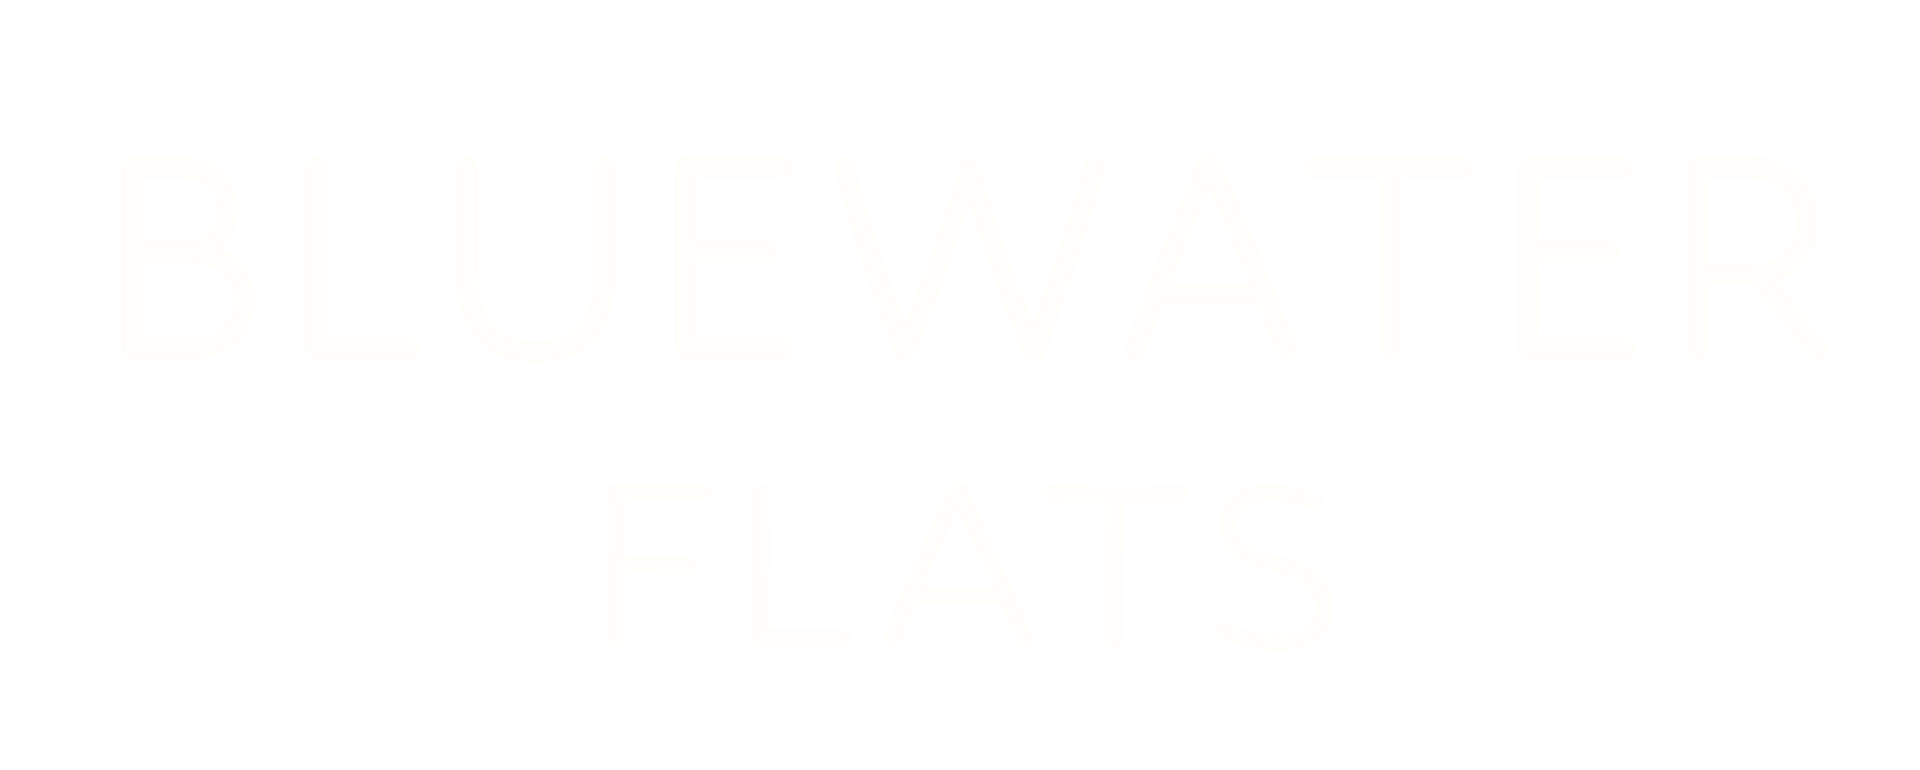 Bluewater flats Logo - Footer